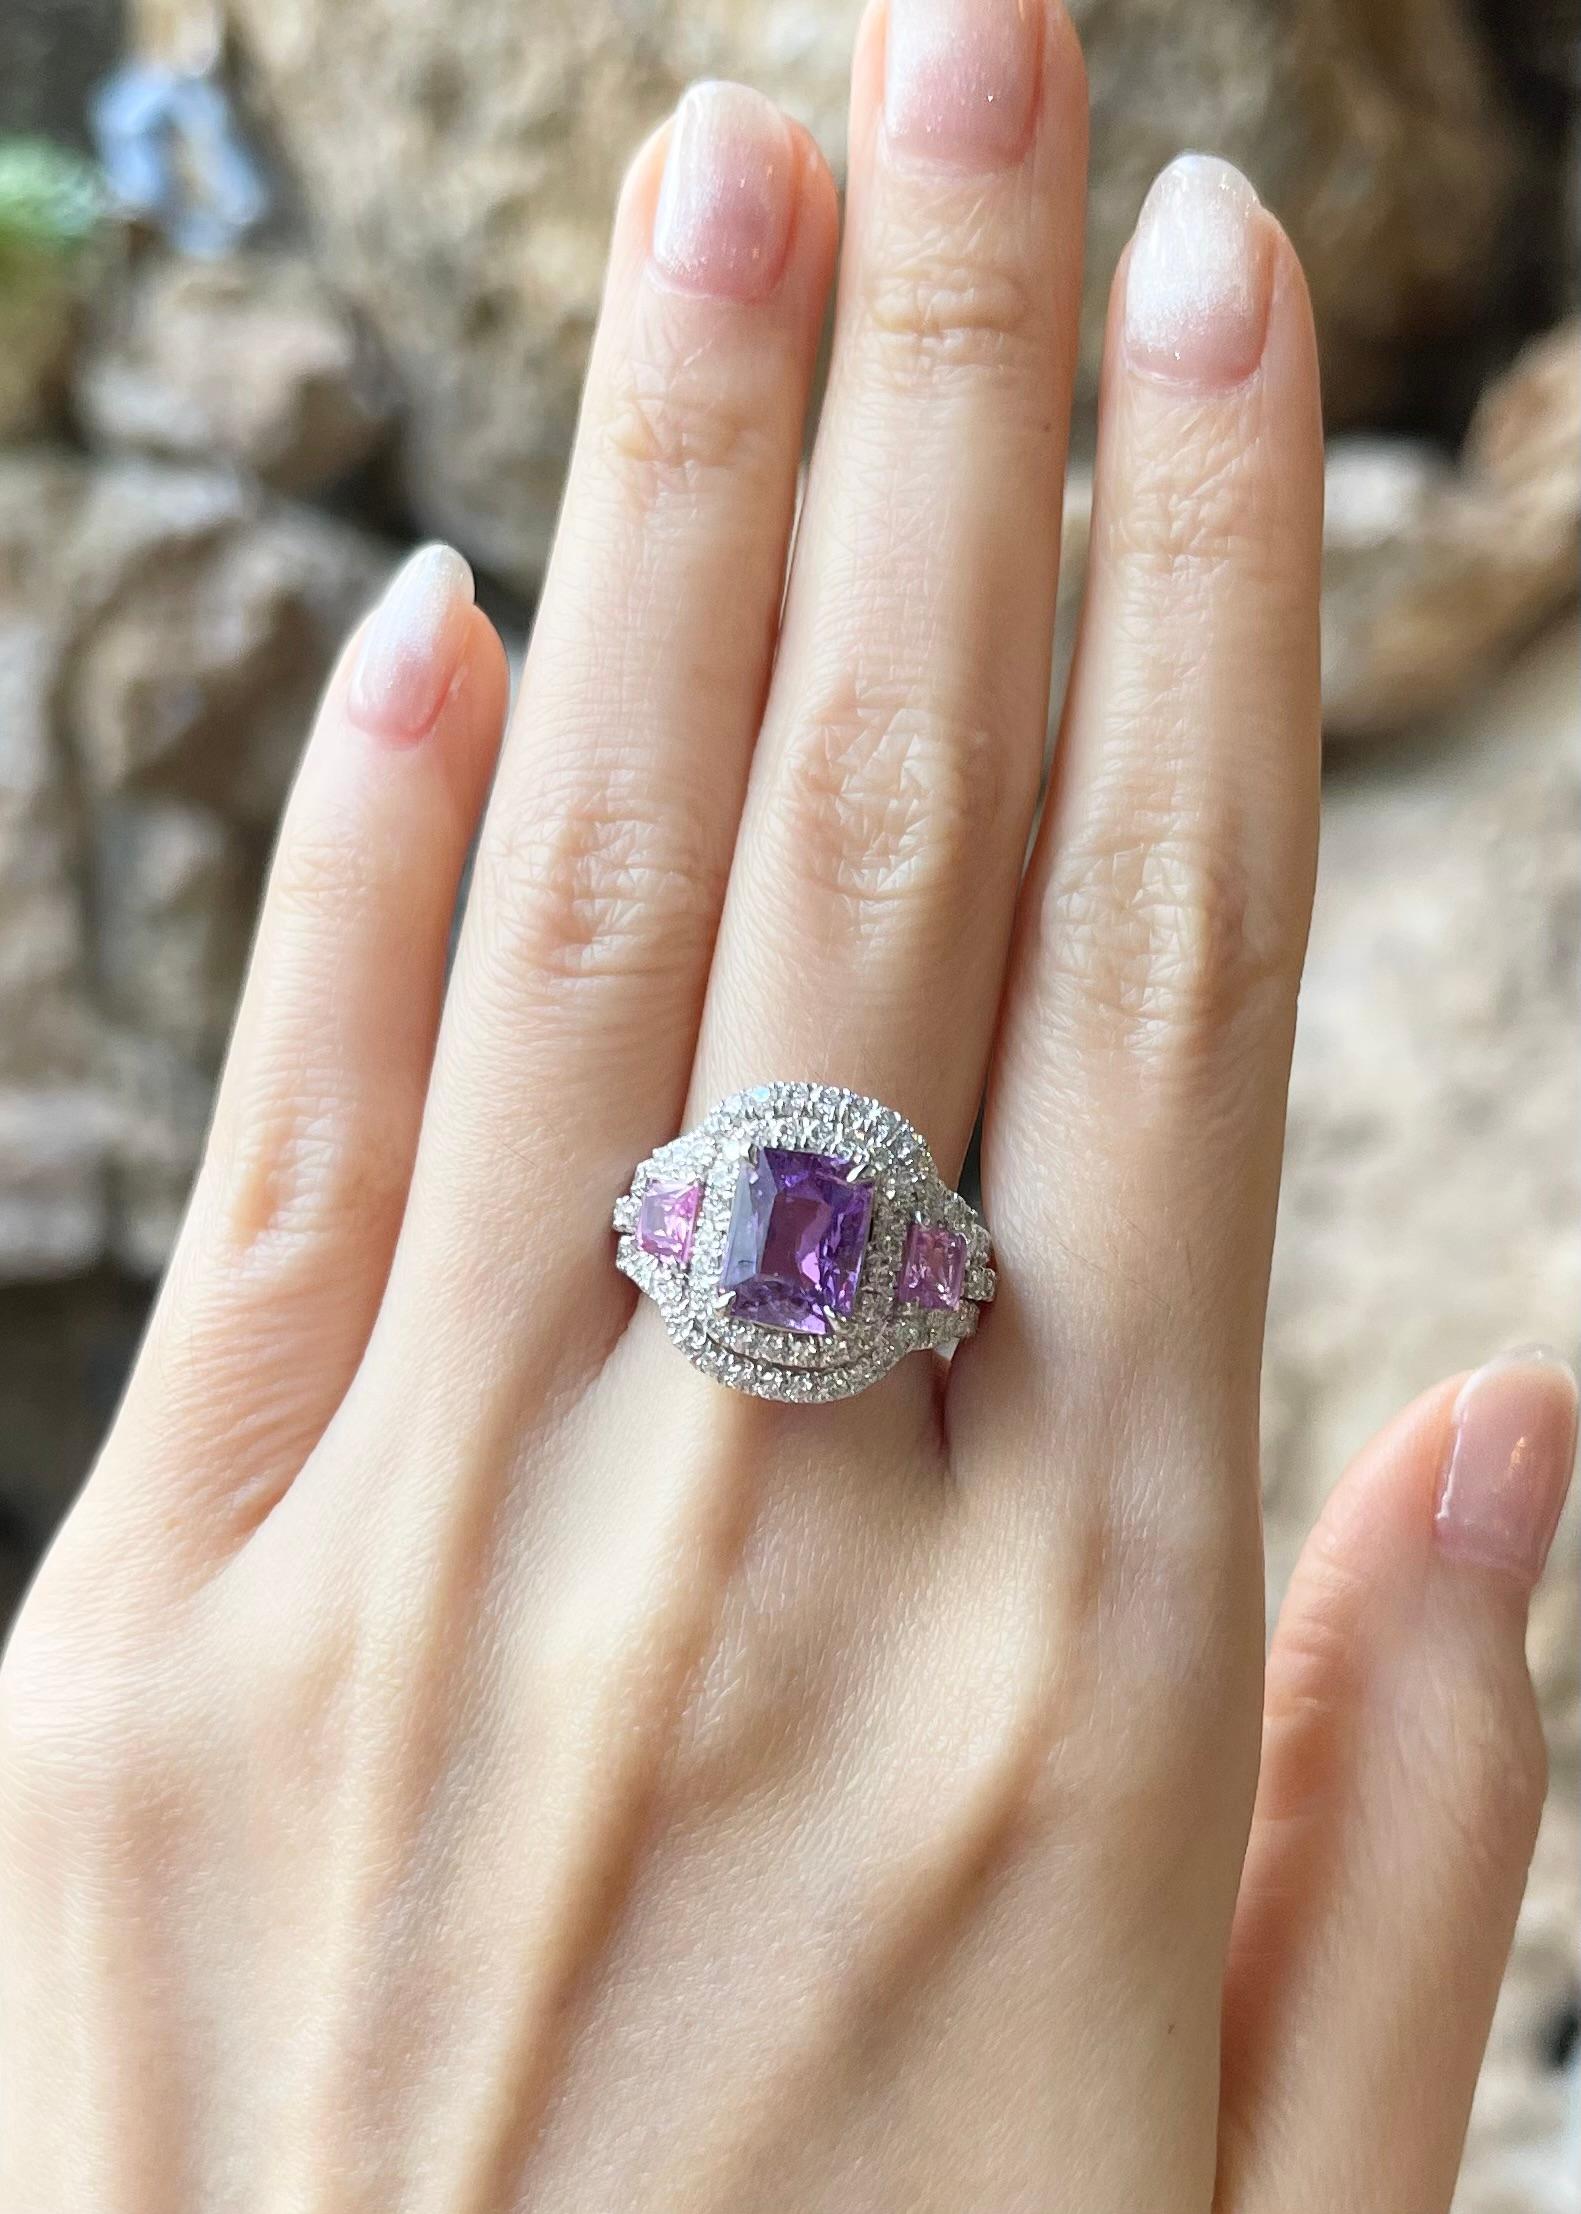 Purple Sapphire 2.63 carats, Pink Sapphire 1.27 carats and Diamond 1.22 carats Ring set in Platinum 950 Settings

Width:  1.8 cm 
Length: 1.7 cm
Ring Size: 54
Total Weight: 15.65 grams

